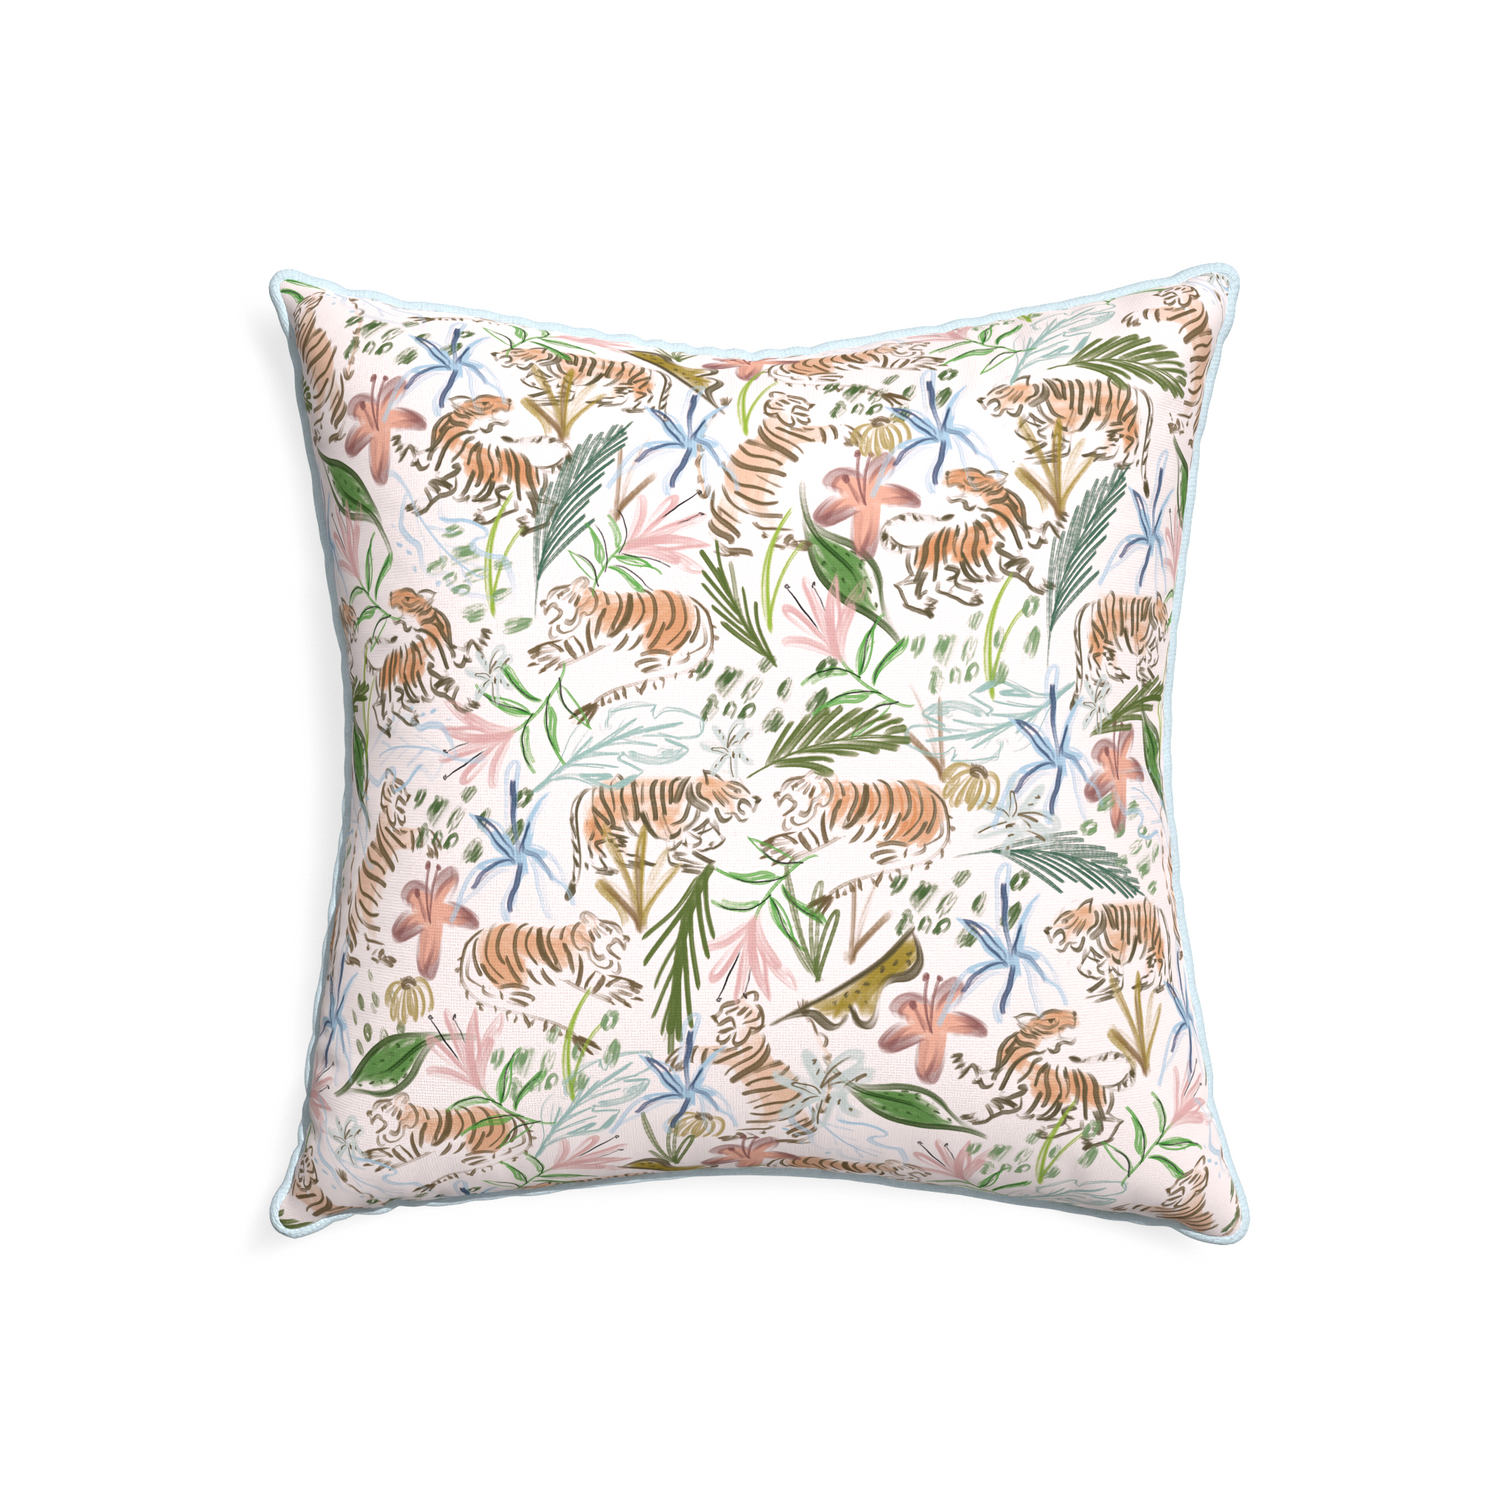 22-square frida pink custom pink chinoiserie tigerpillow with powder piping on white background